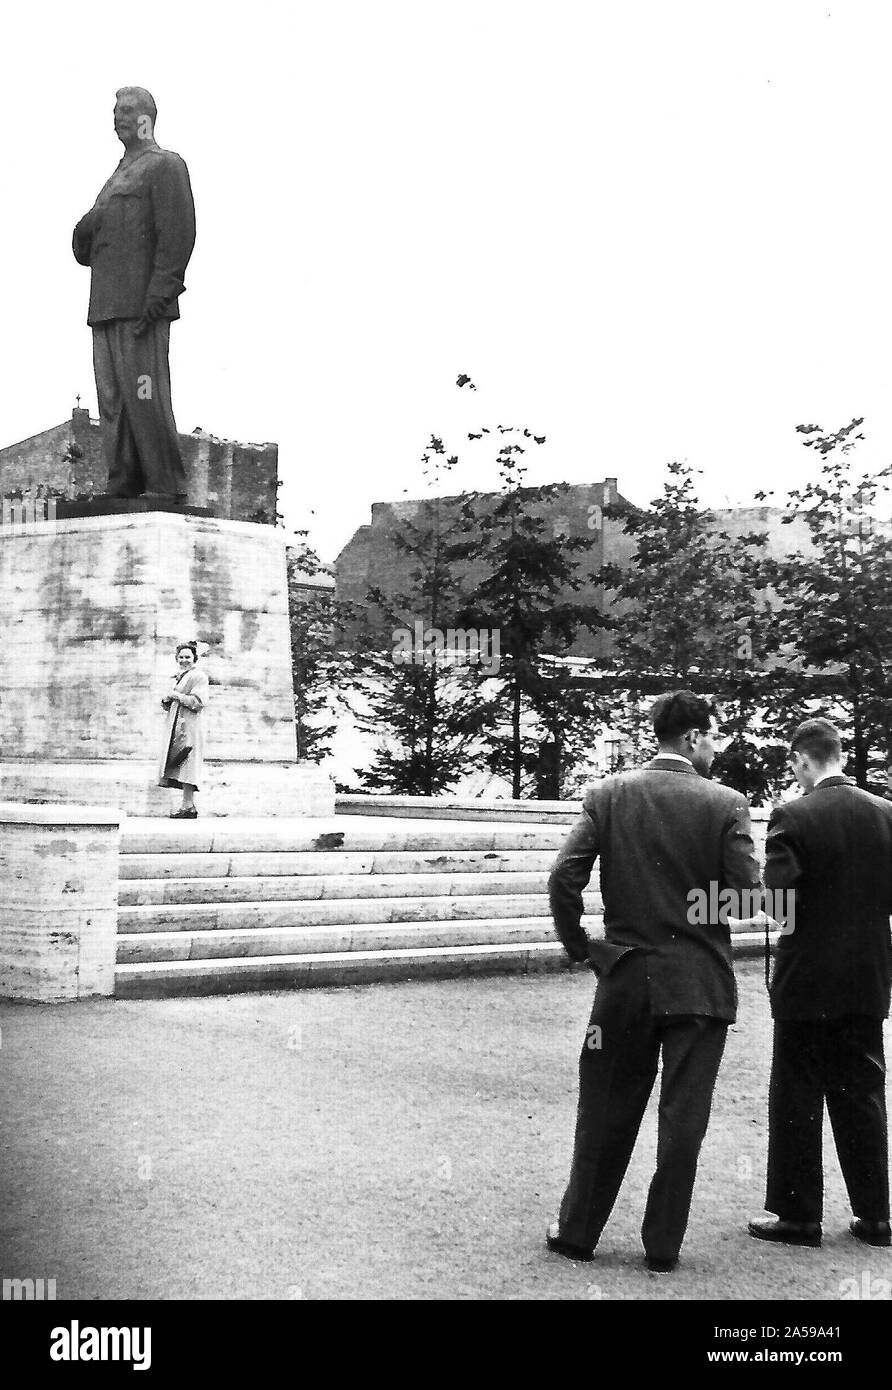 Photograph of two men and a woman in front of the former statue of Joseph Stalin on what is now Karl Marx Allee in Berlin, taken in 1955 (statue removed in 1961?) Stock Photo